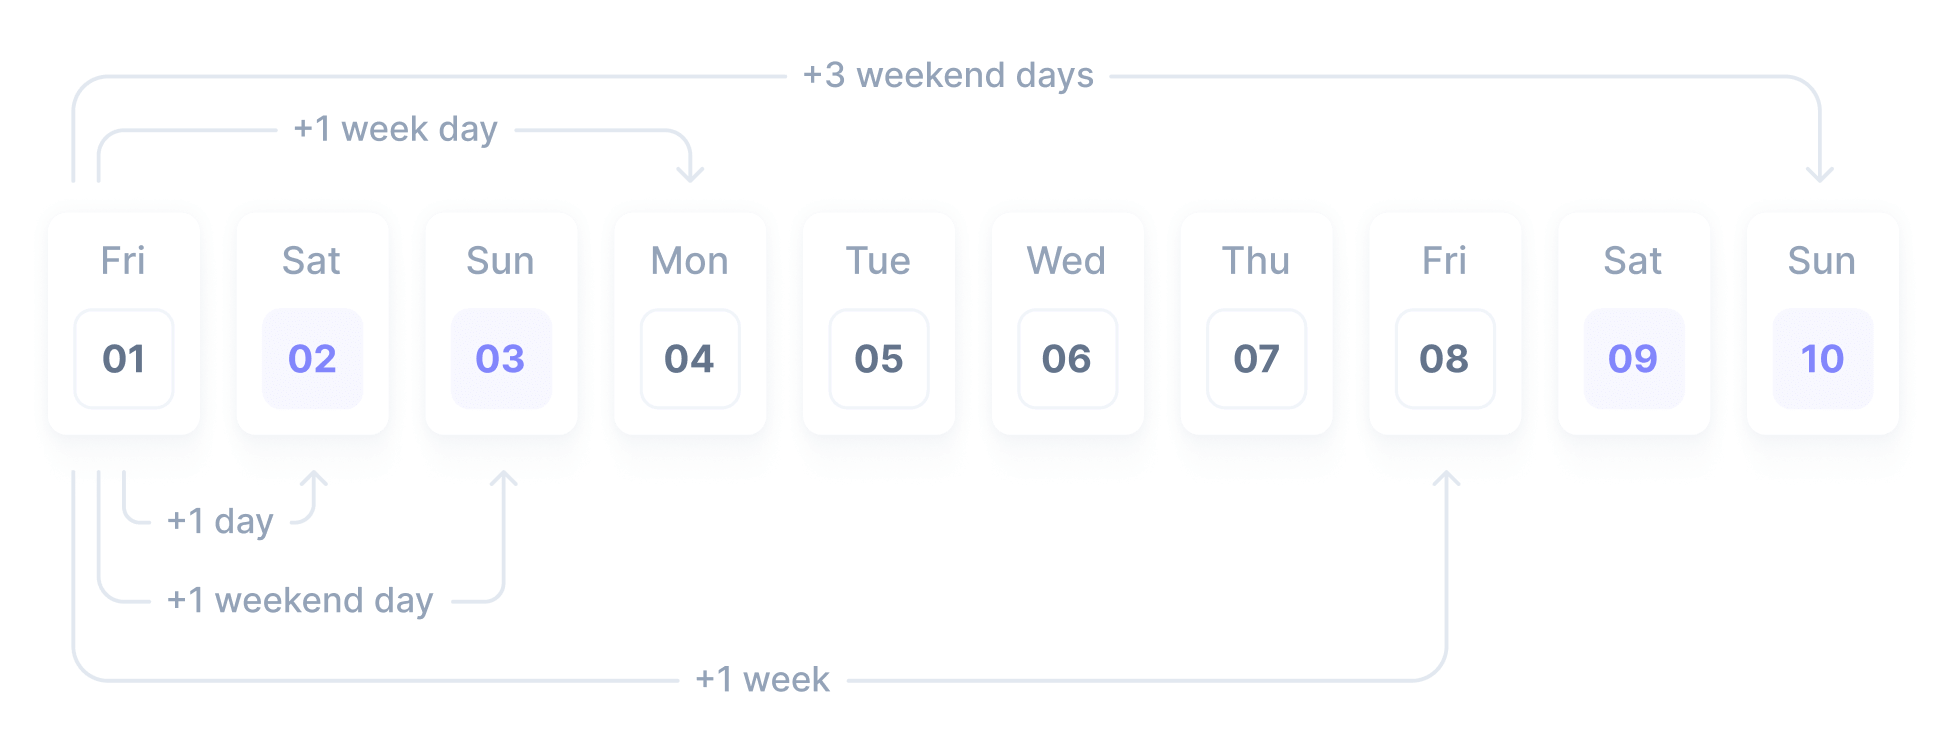 Calculation involving weekdays and weekend days